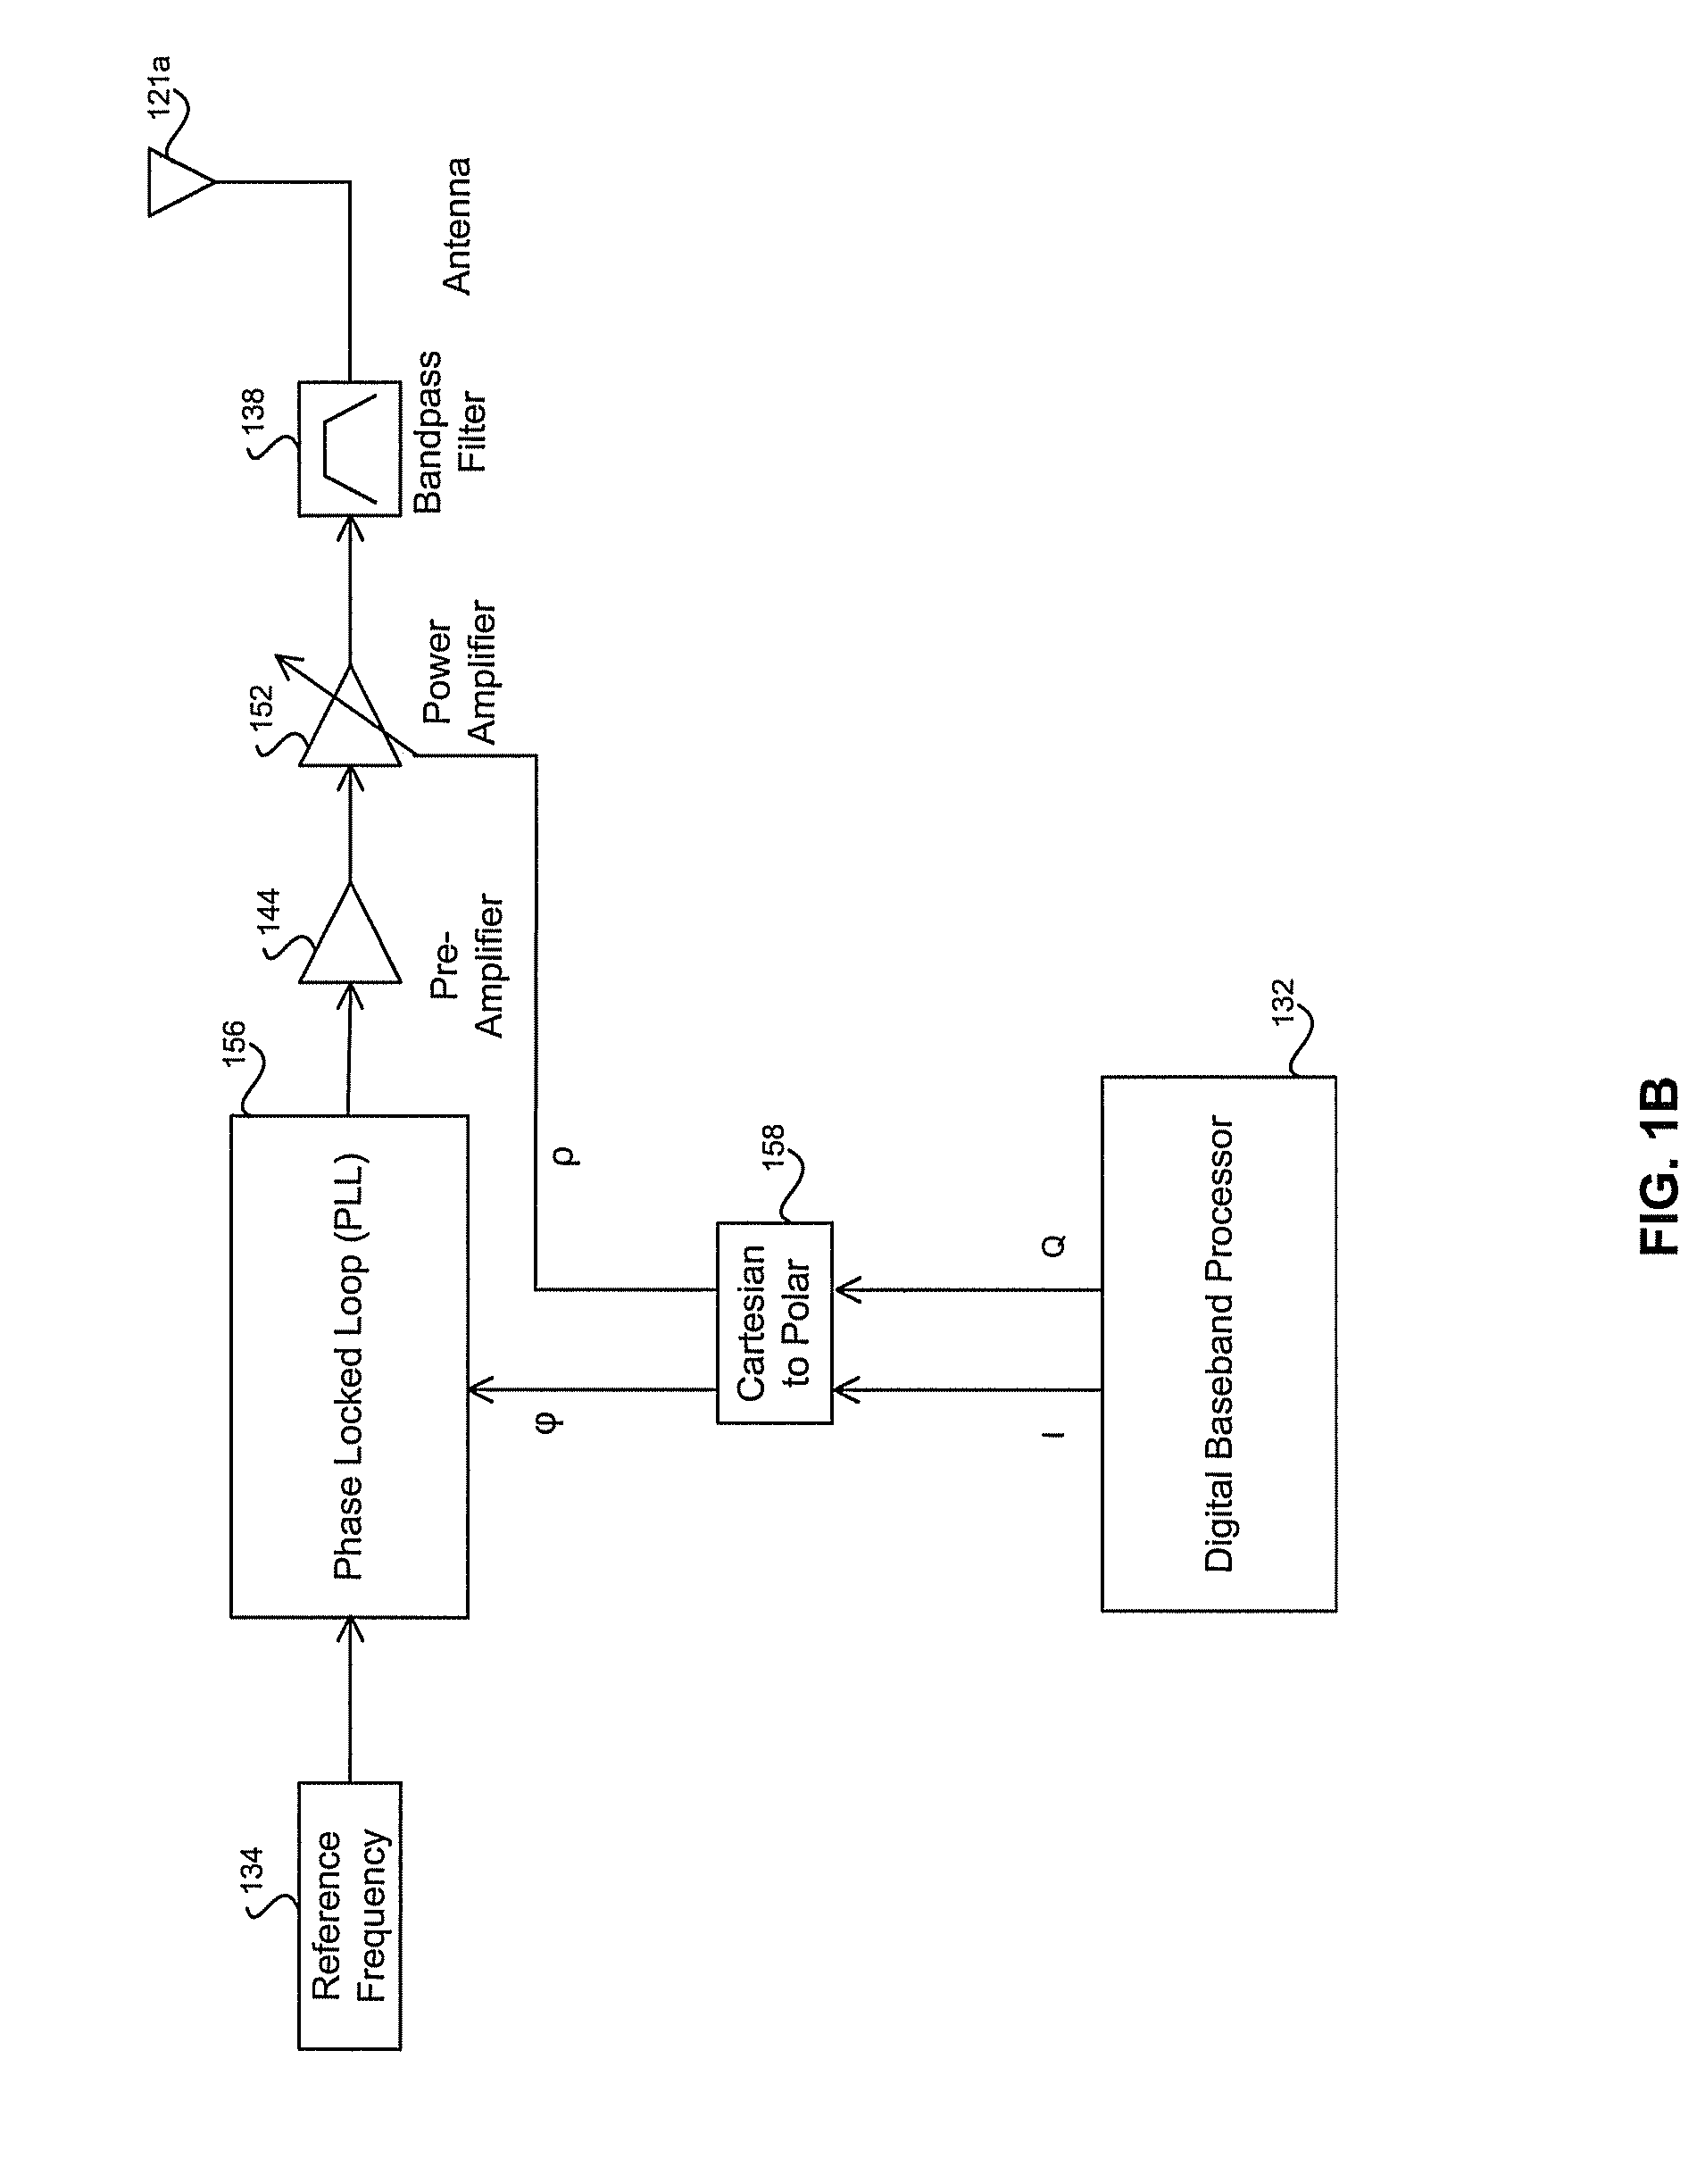 Method and System for Digital Tracking in Direct and Polar Modulation